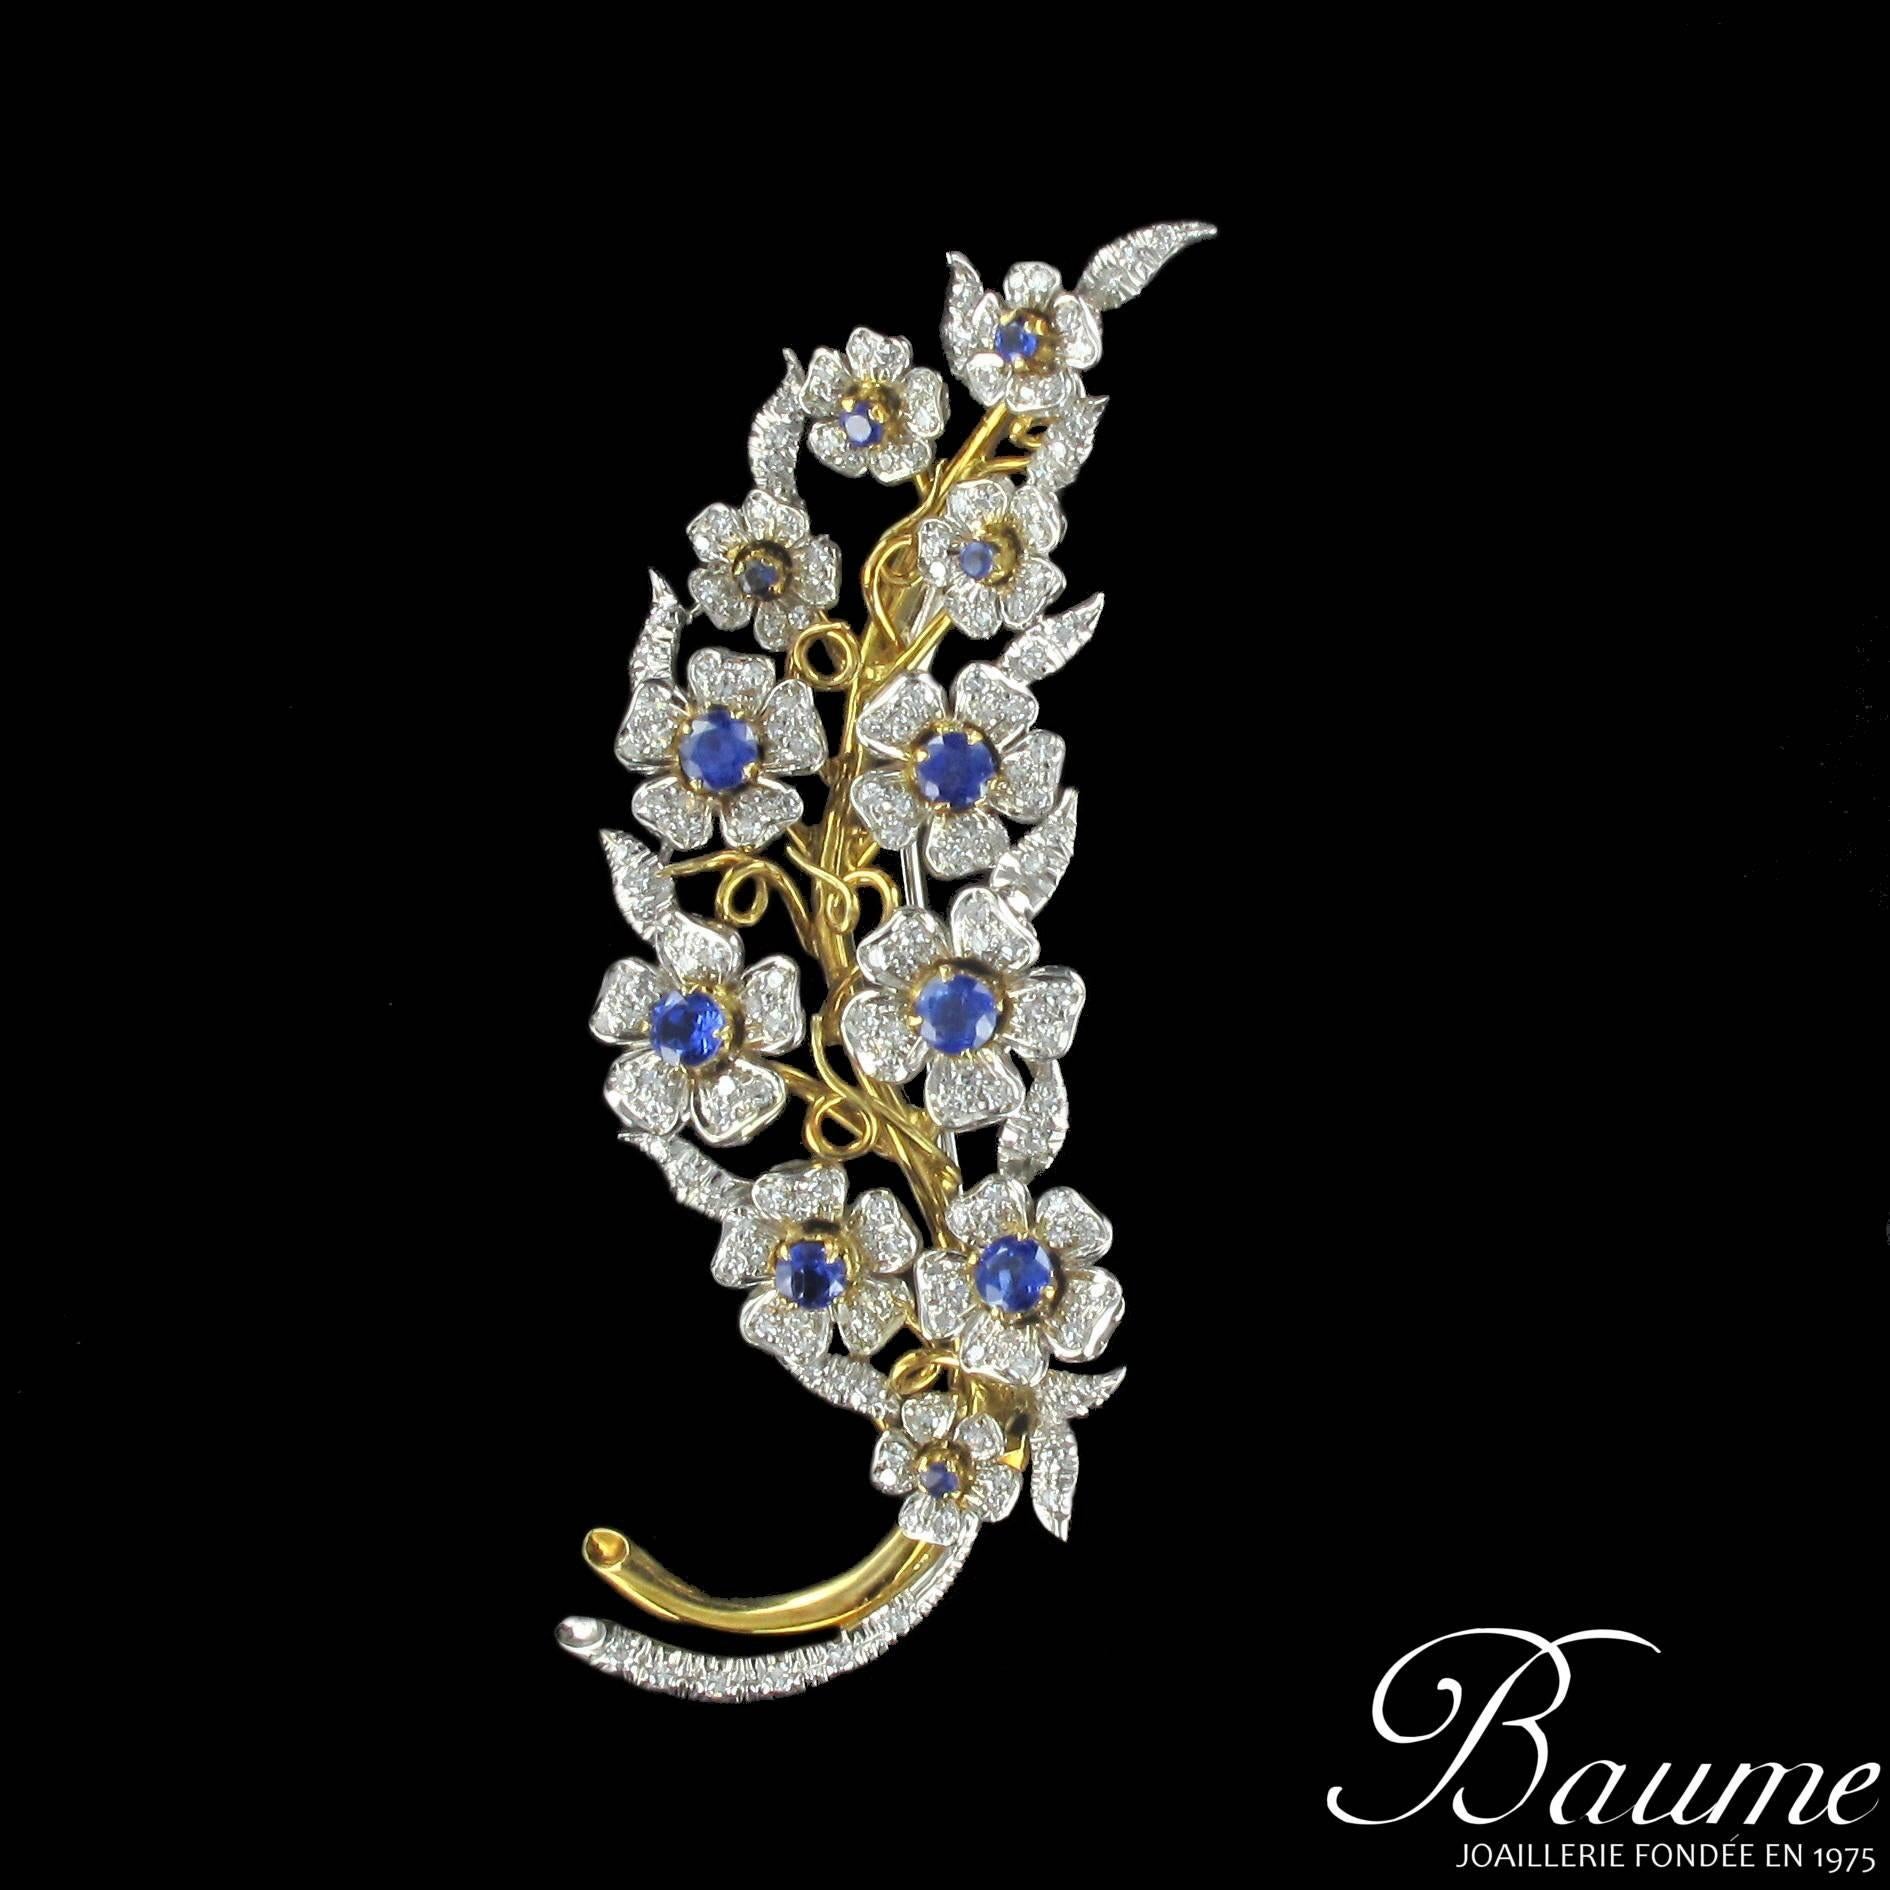 Brooch in 18 carats white and yellow gold.

This sapphire and diamond brooch in the form of an openwork branch features numerous flowers with claw set round blue sapphires at their centre and diamonds set into the petals. This antique brooch has